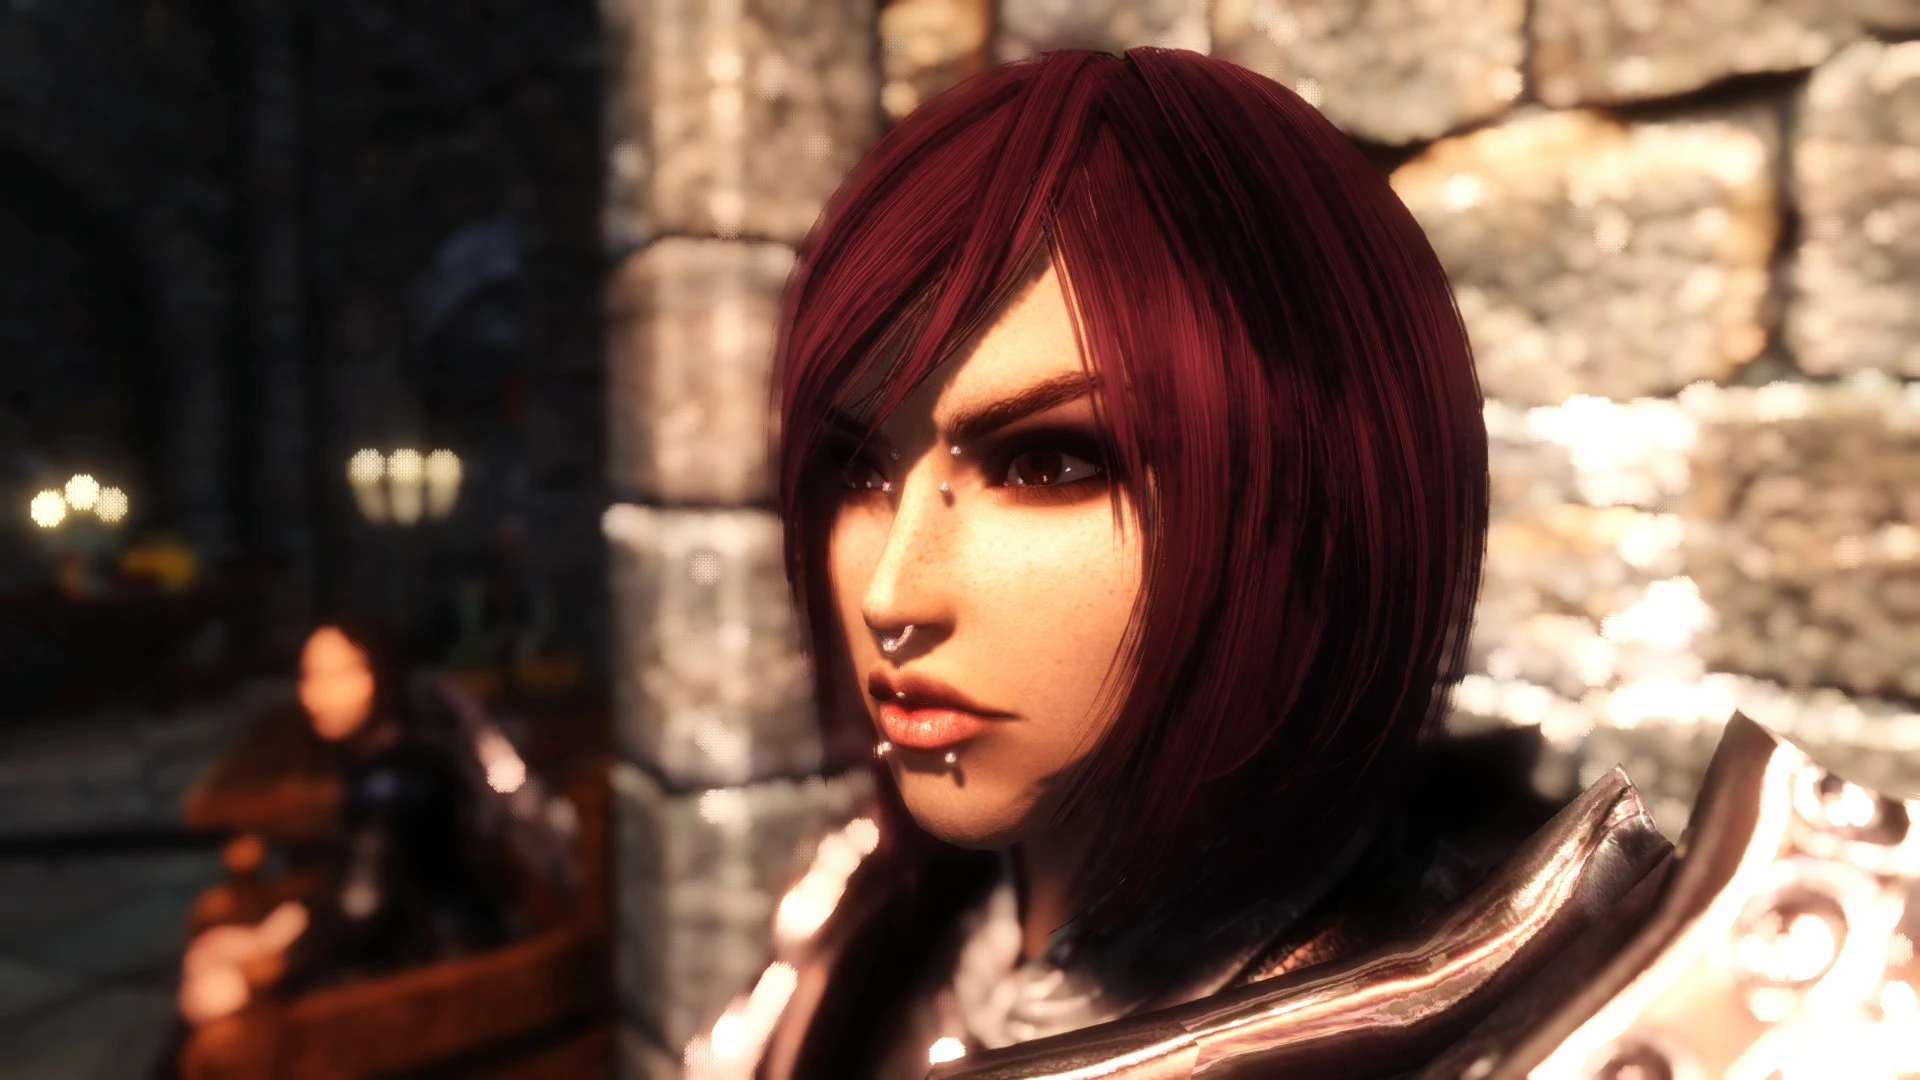 There should be more facial piercing mods than mods for geni